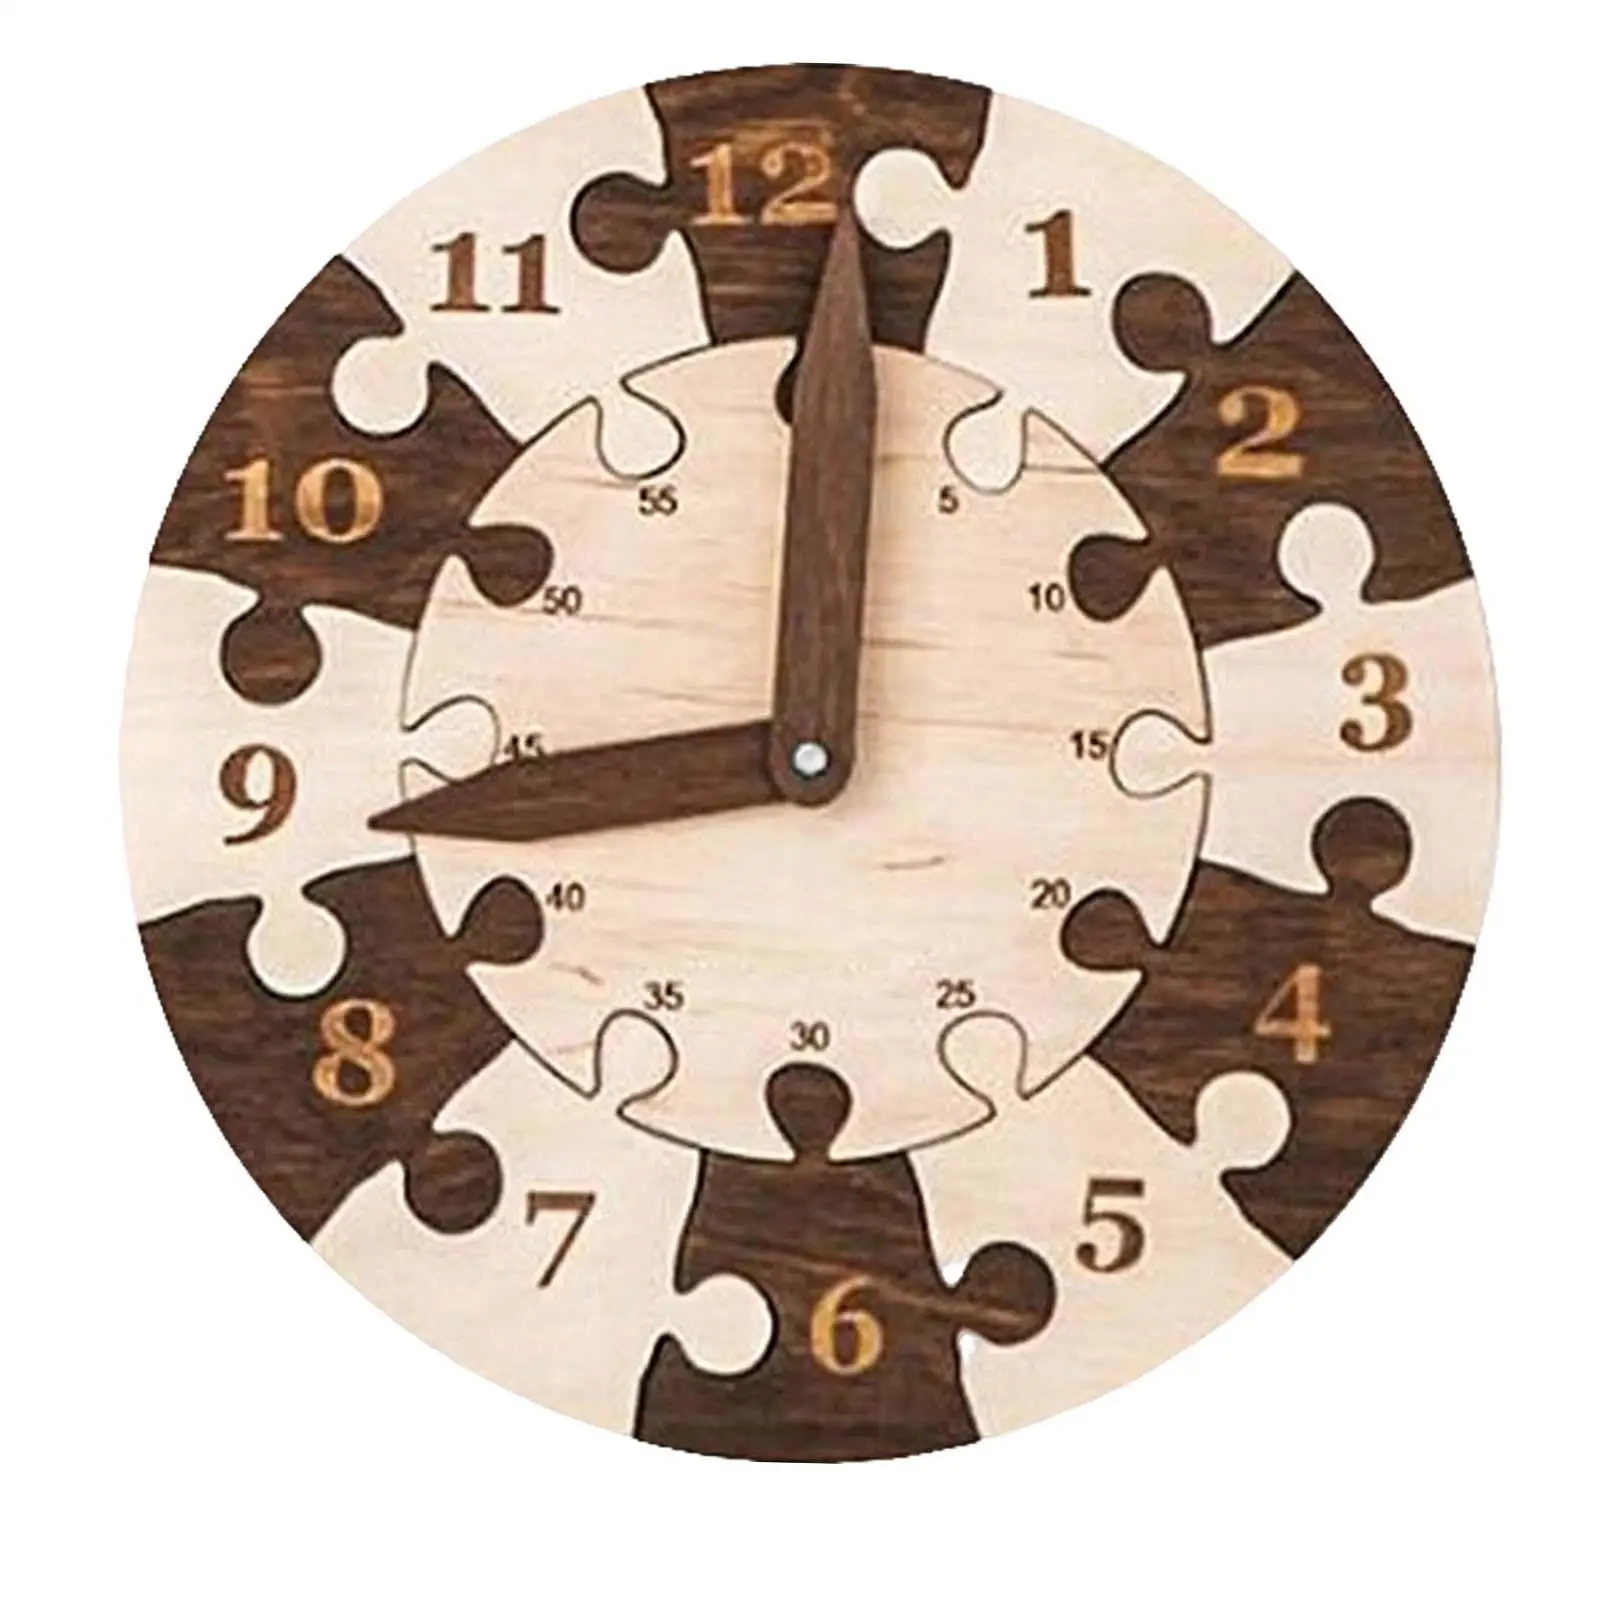 Montessori Wooden Clock Toys Kindergartner Learning Activities Learn How to Tell Time Teaching Clock for Baby Children Classroom